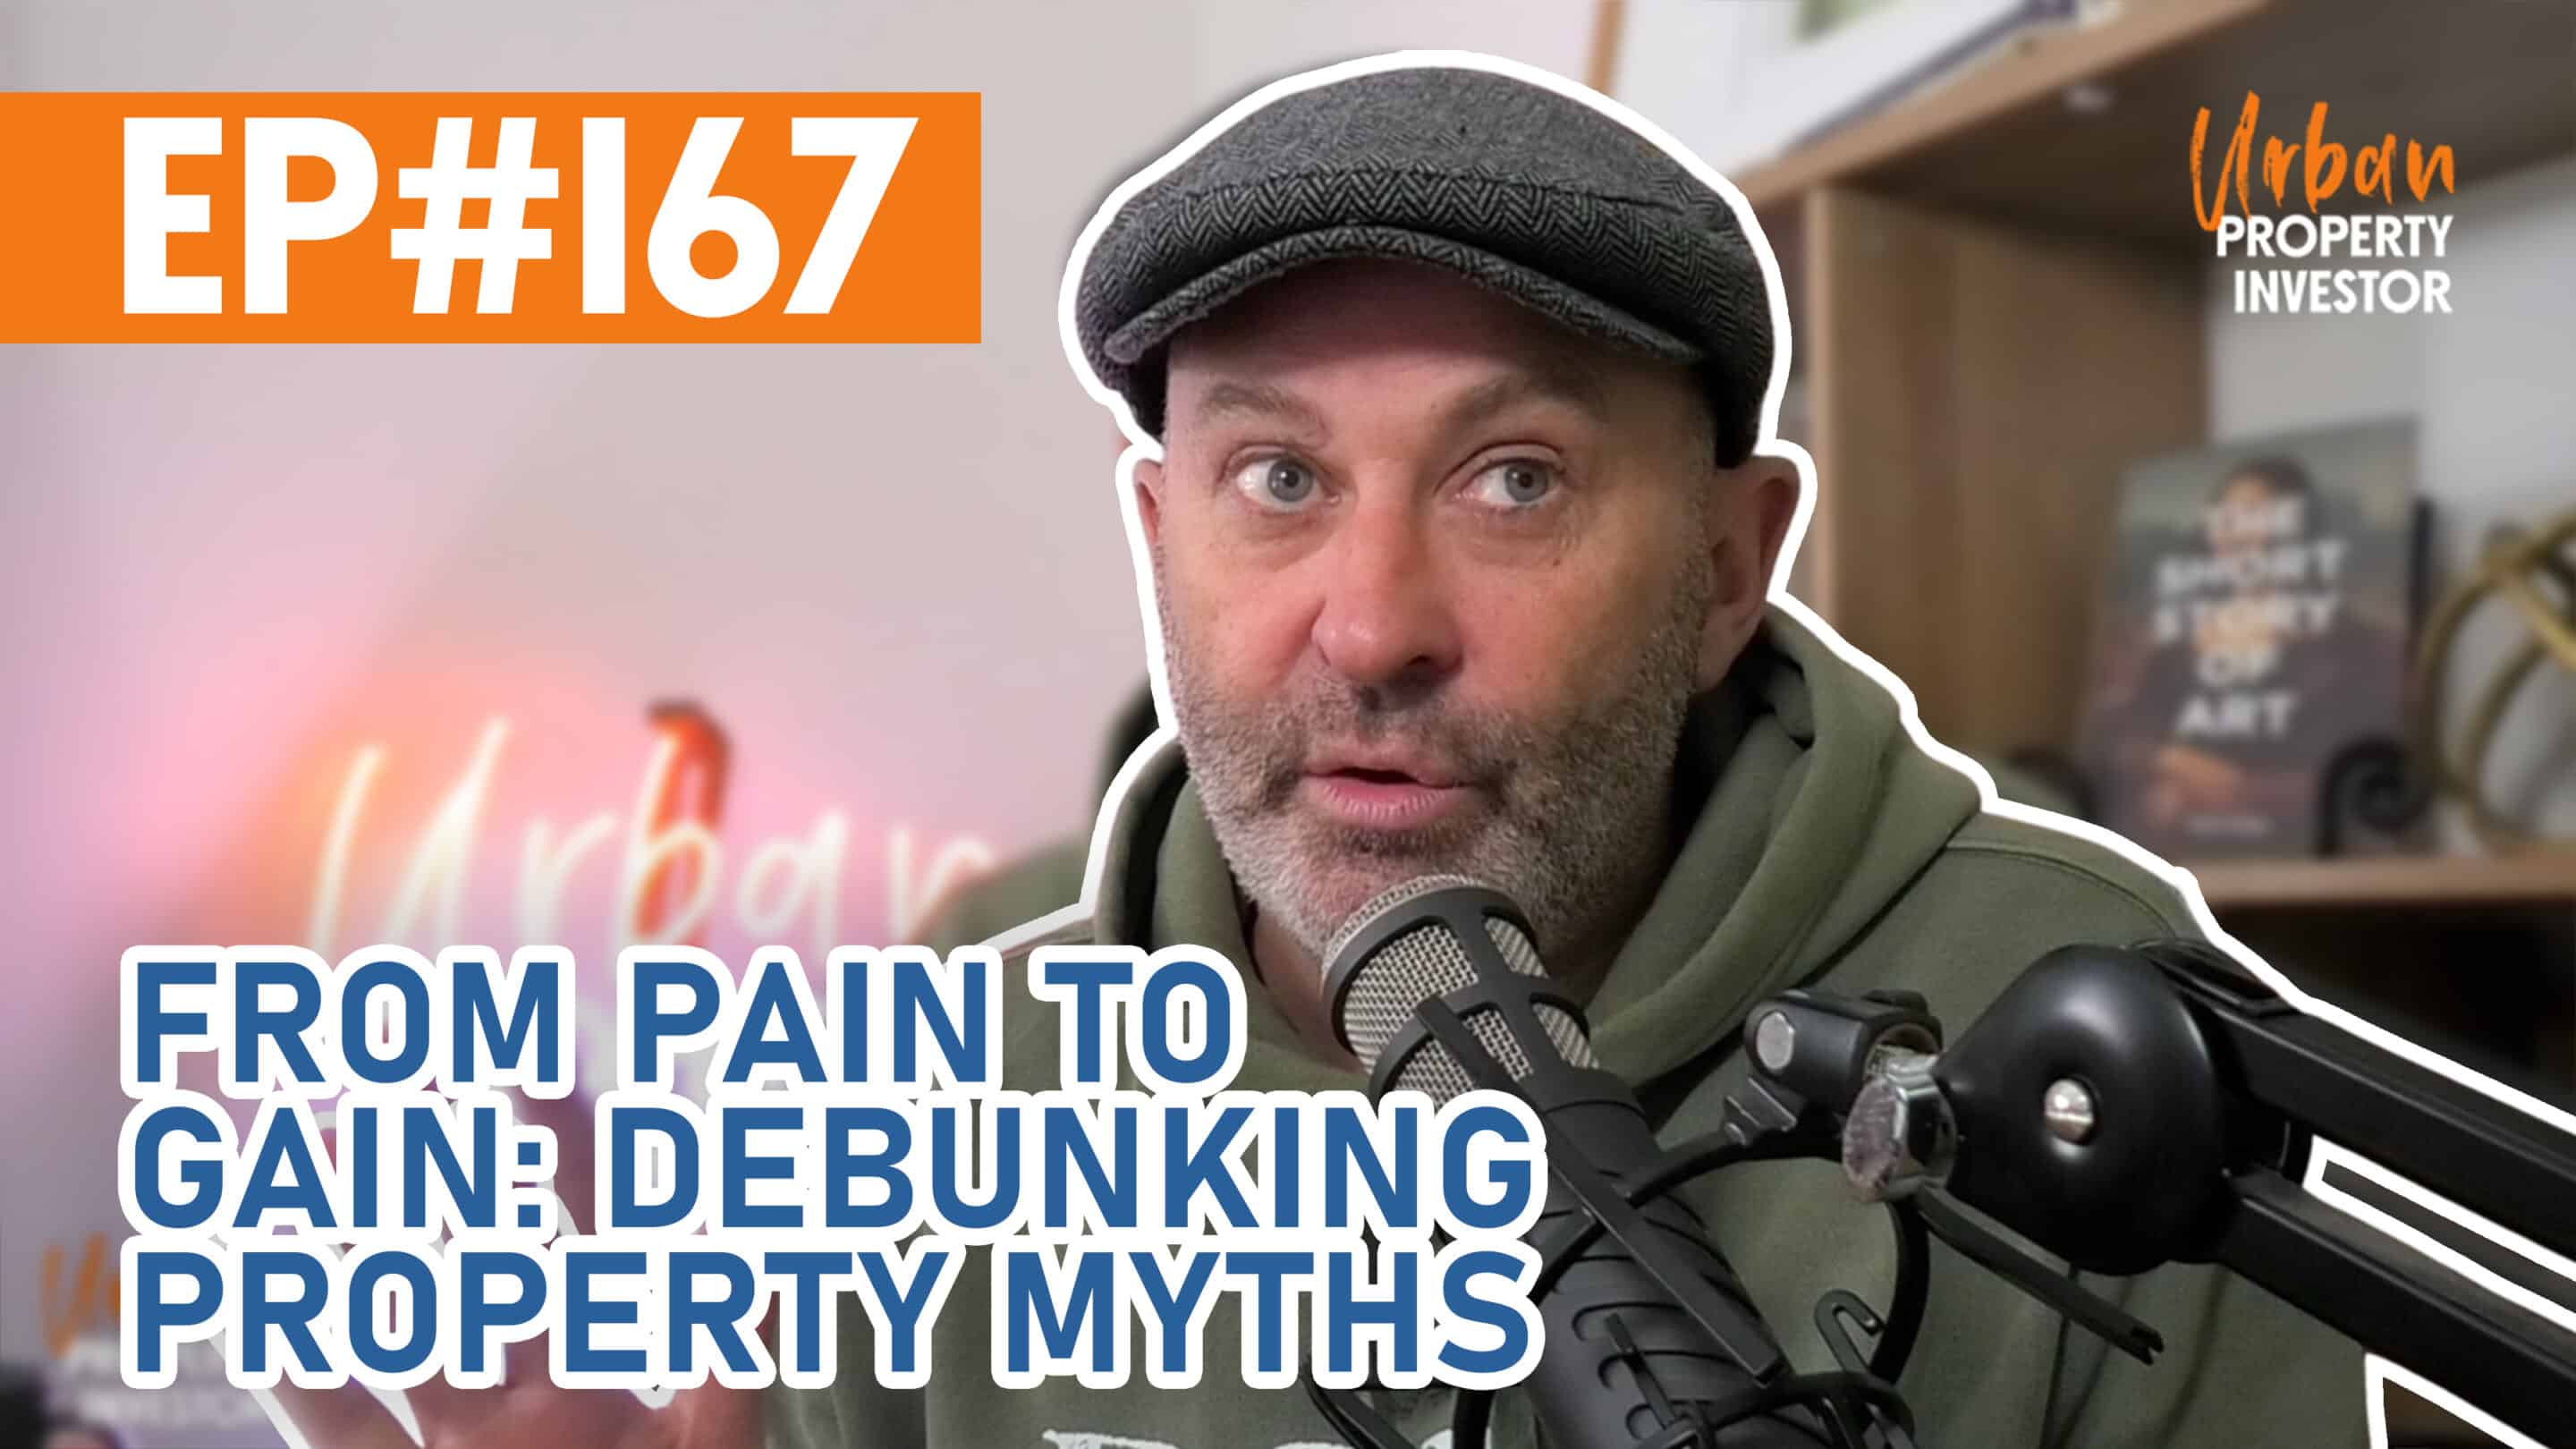 From Pain to Gain: Debunking Property Myths